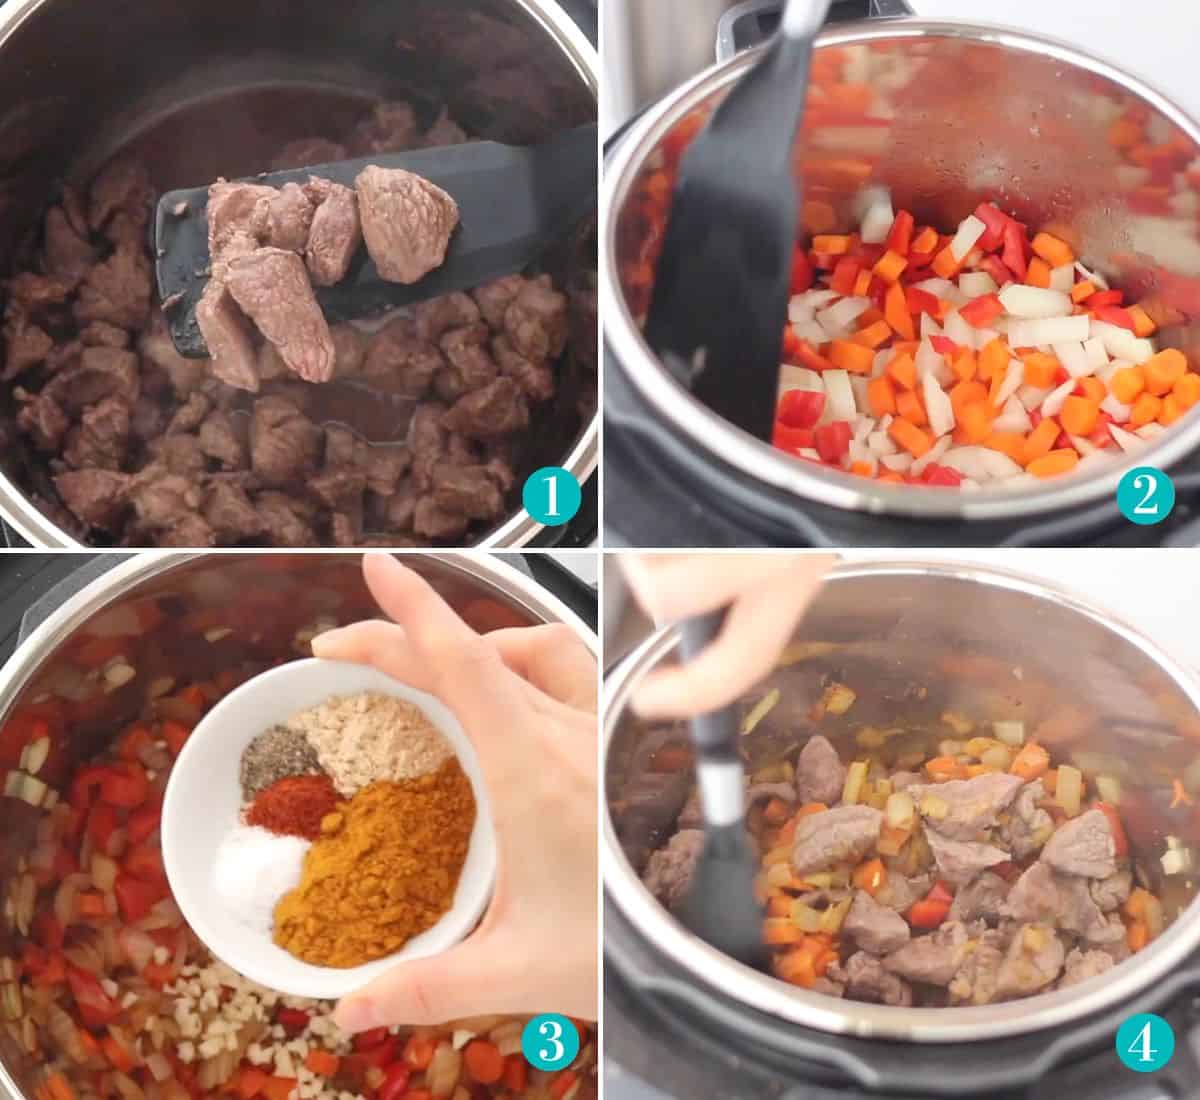 lamb searing in instant pot, veggies sauteeing in instant pot, hand holding a bowl of spices over sauteed veggies, lamb stirred into sauteed veggies in pot.